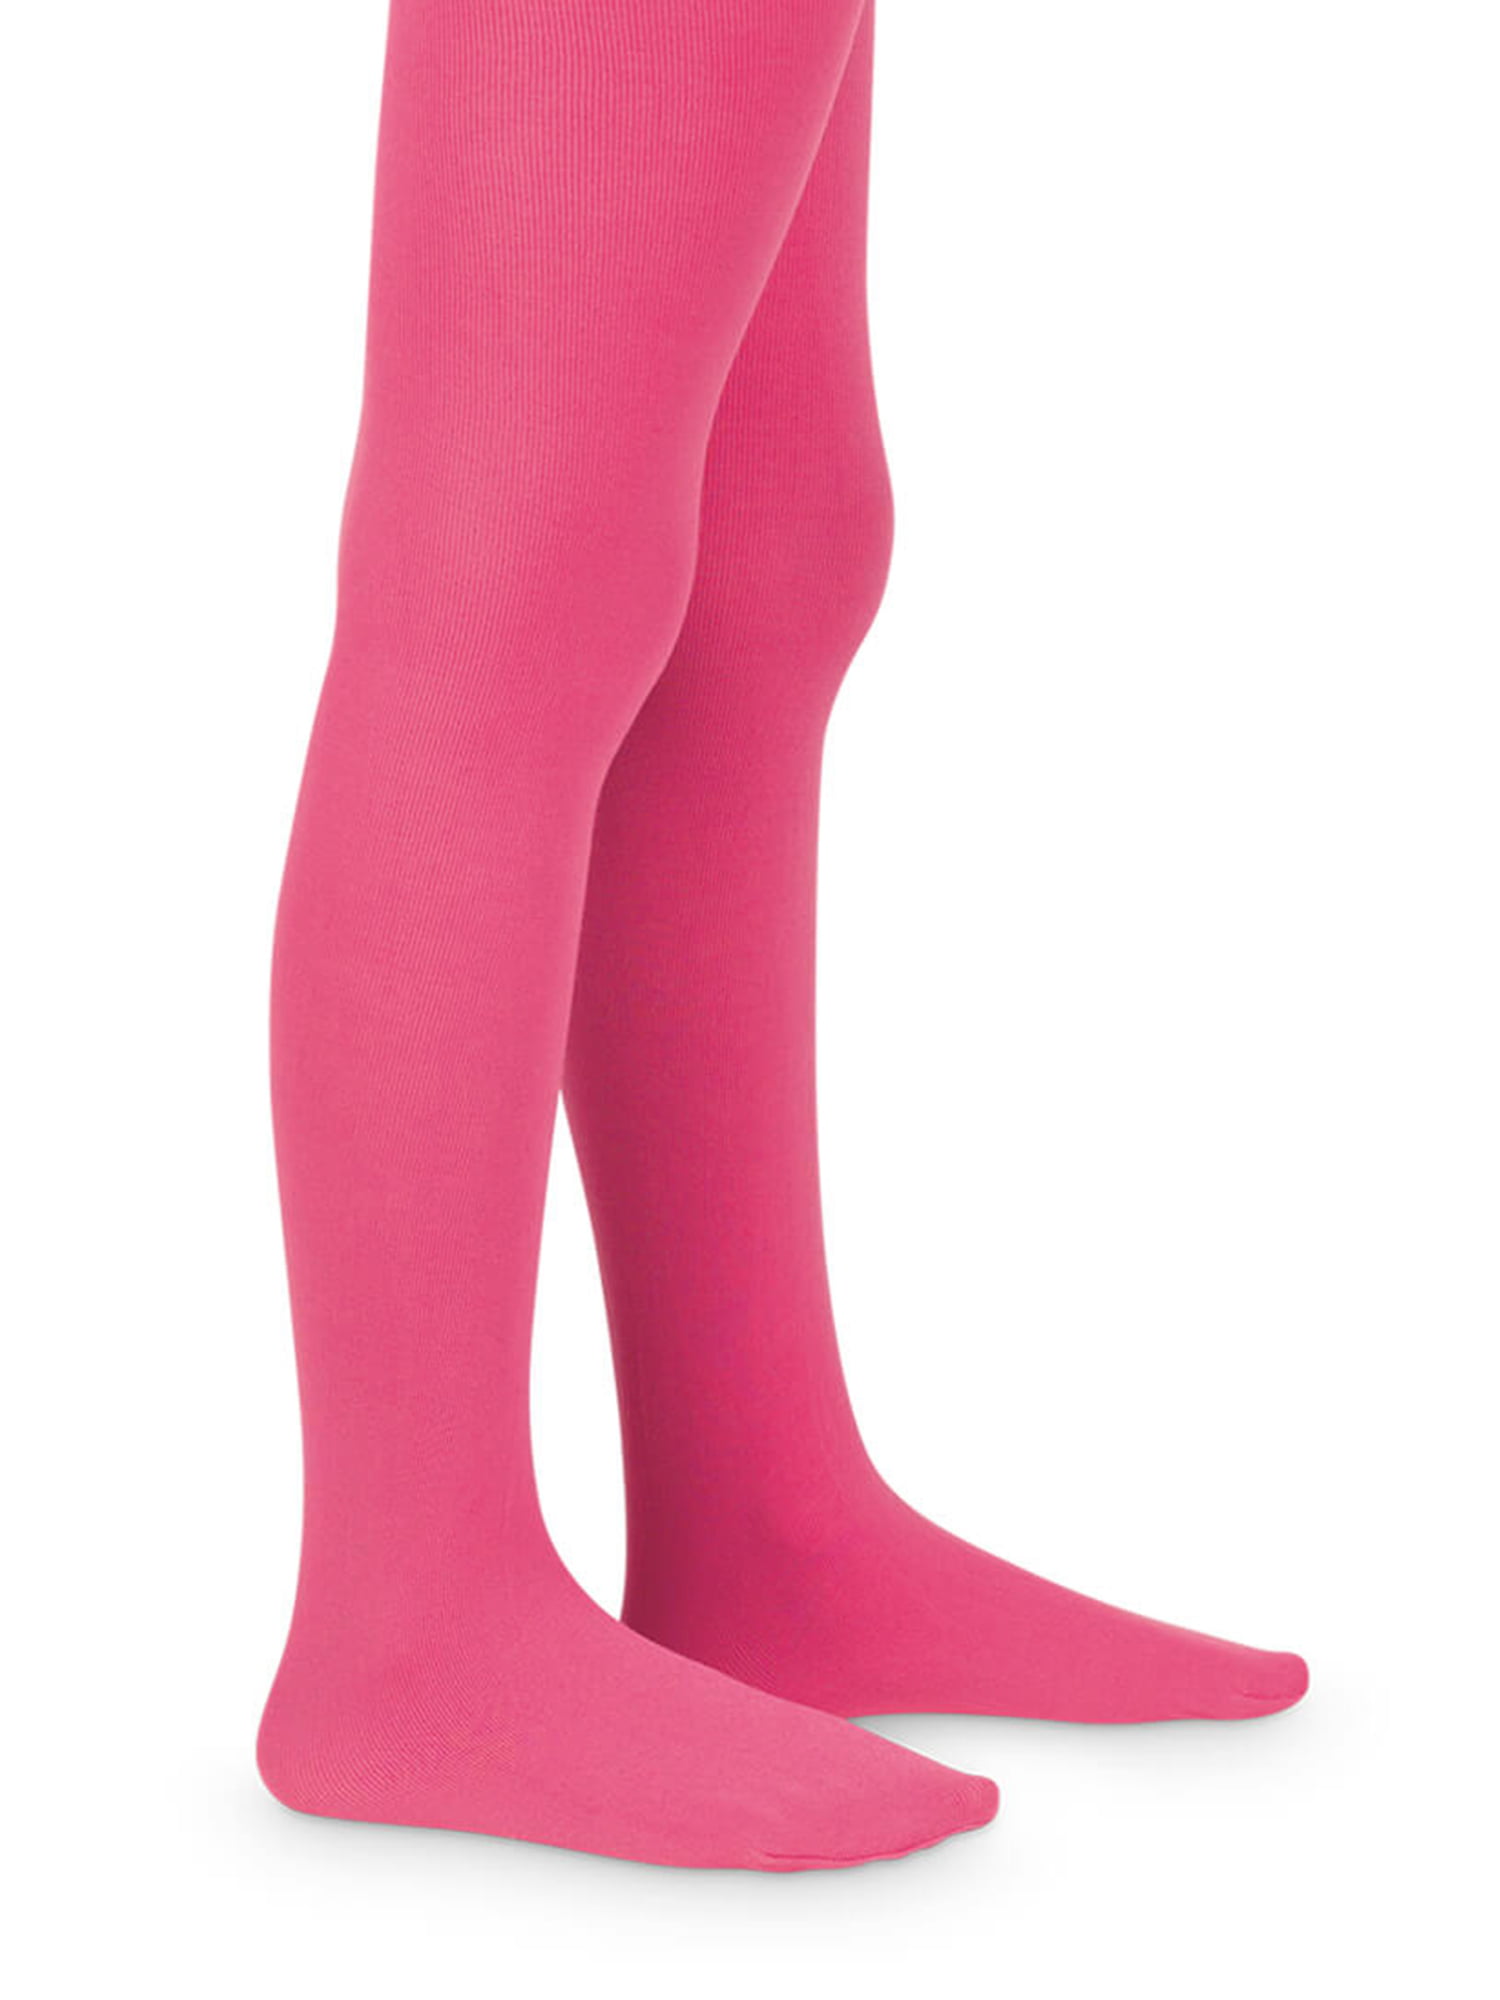 2 Pack Trimfit Toddler Girls Textured & Opaque Footed Tights Pink Size 10-14 